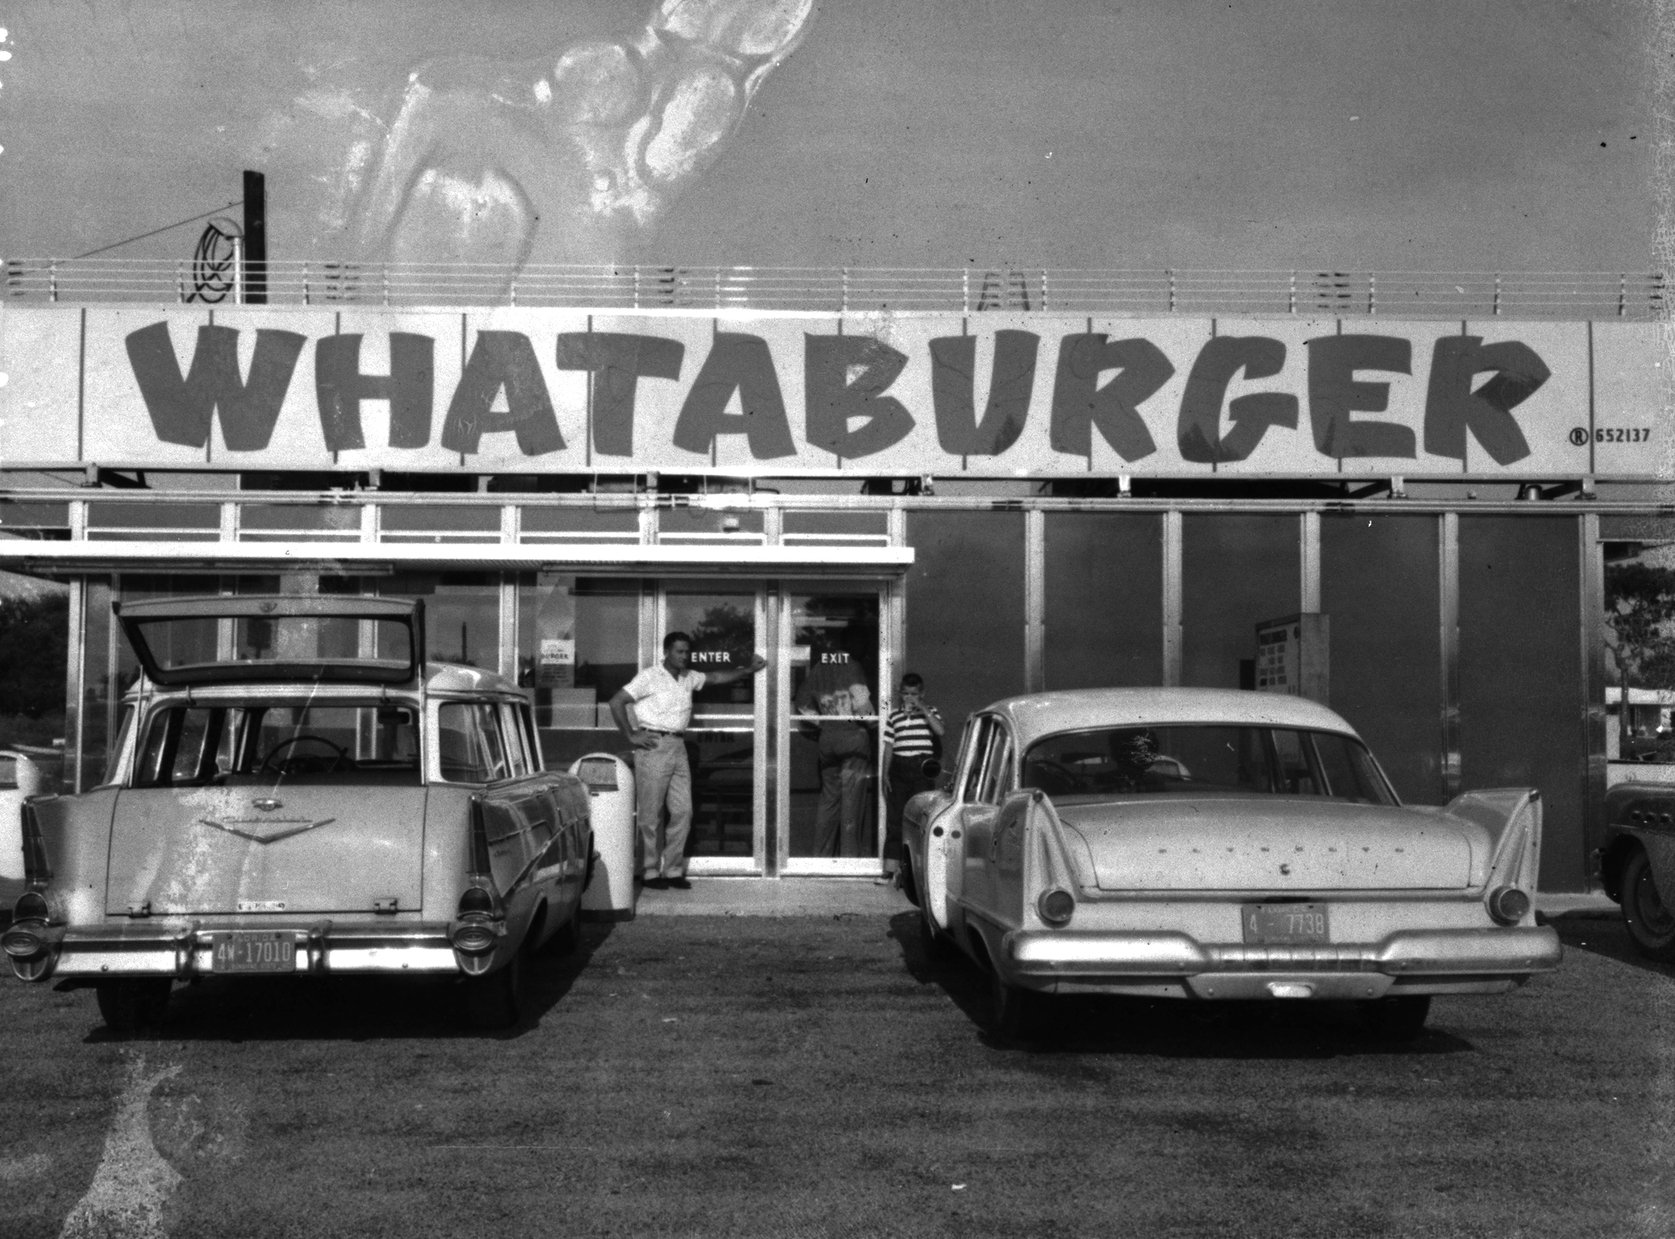 The first Whataburger was served 66 years ago today in South Texas